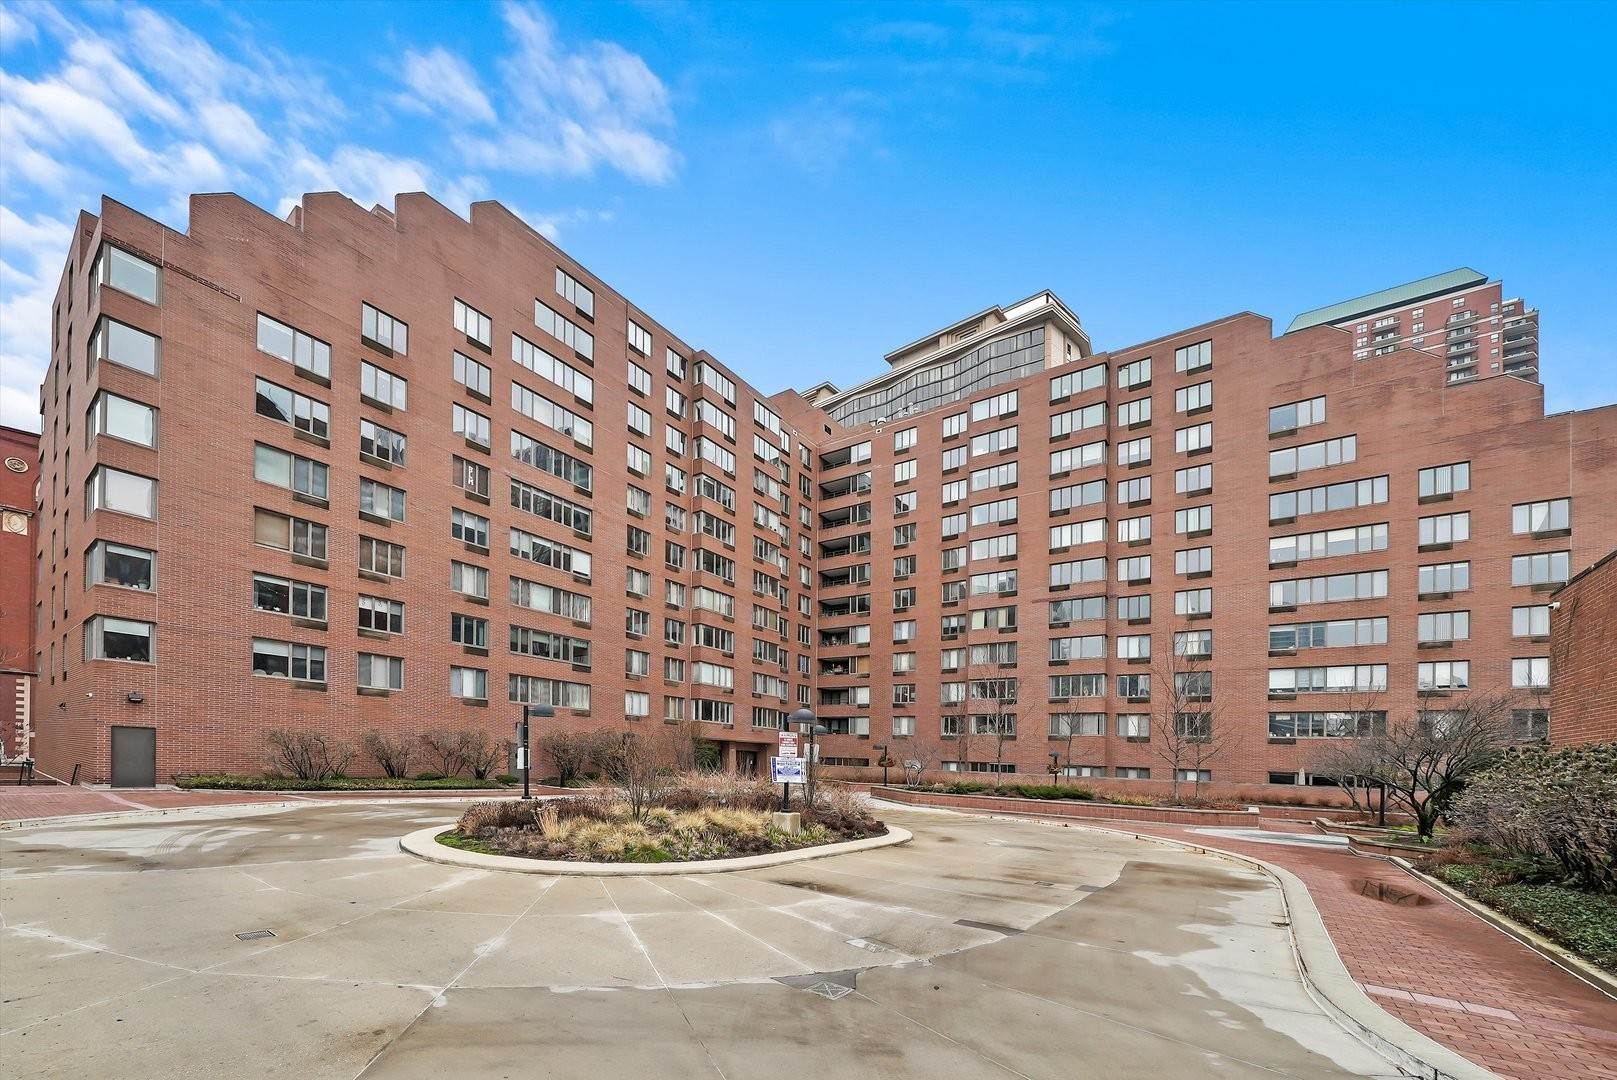 Single Family for Sale at Dearborn Park, Chicago, IL 60605